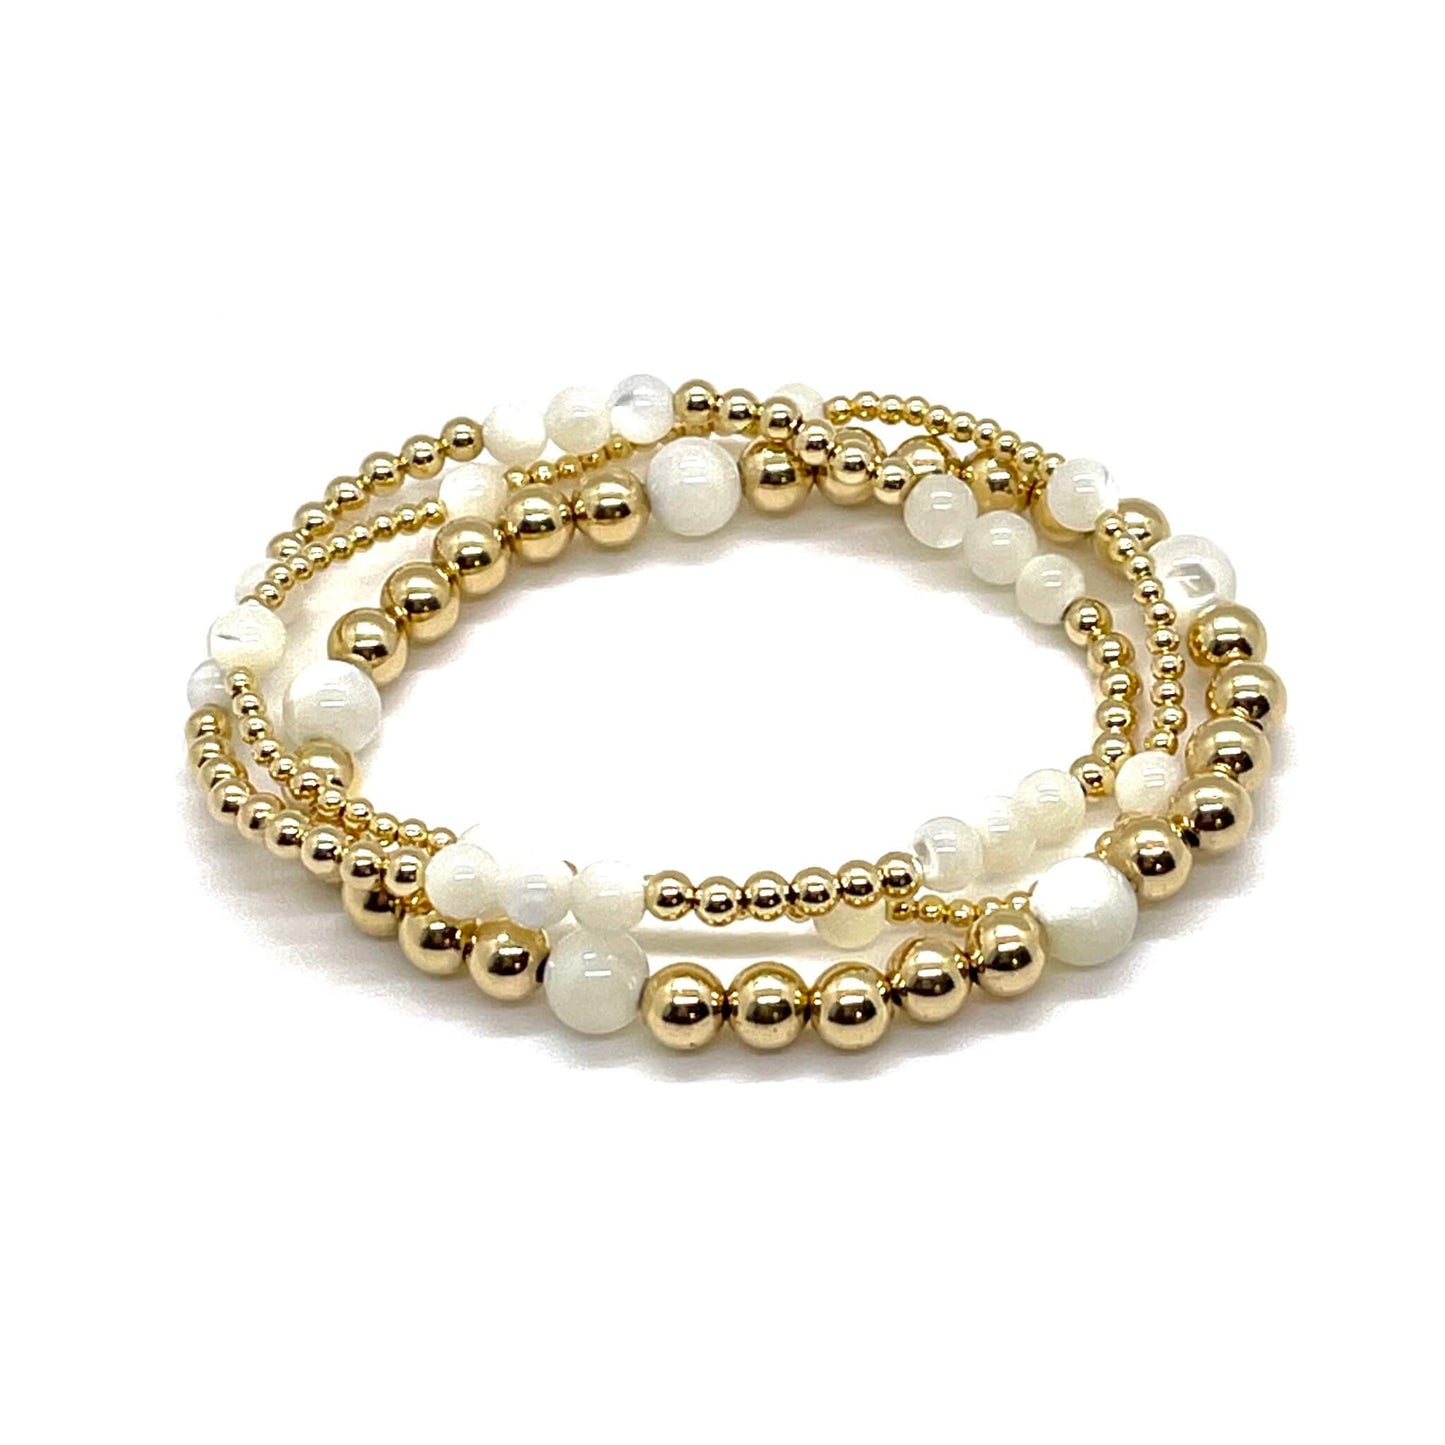 Bridal jewelry sets with pearl and 14K gold filled beads. Custom handmade bracelets.